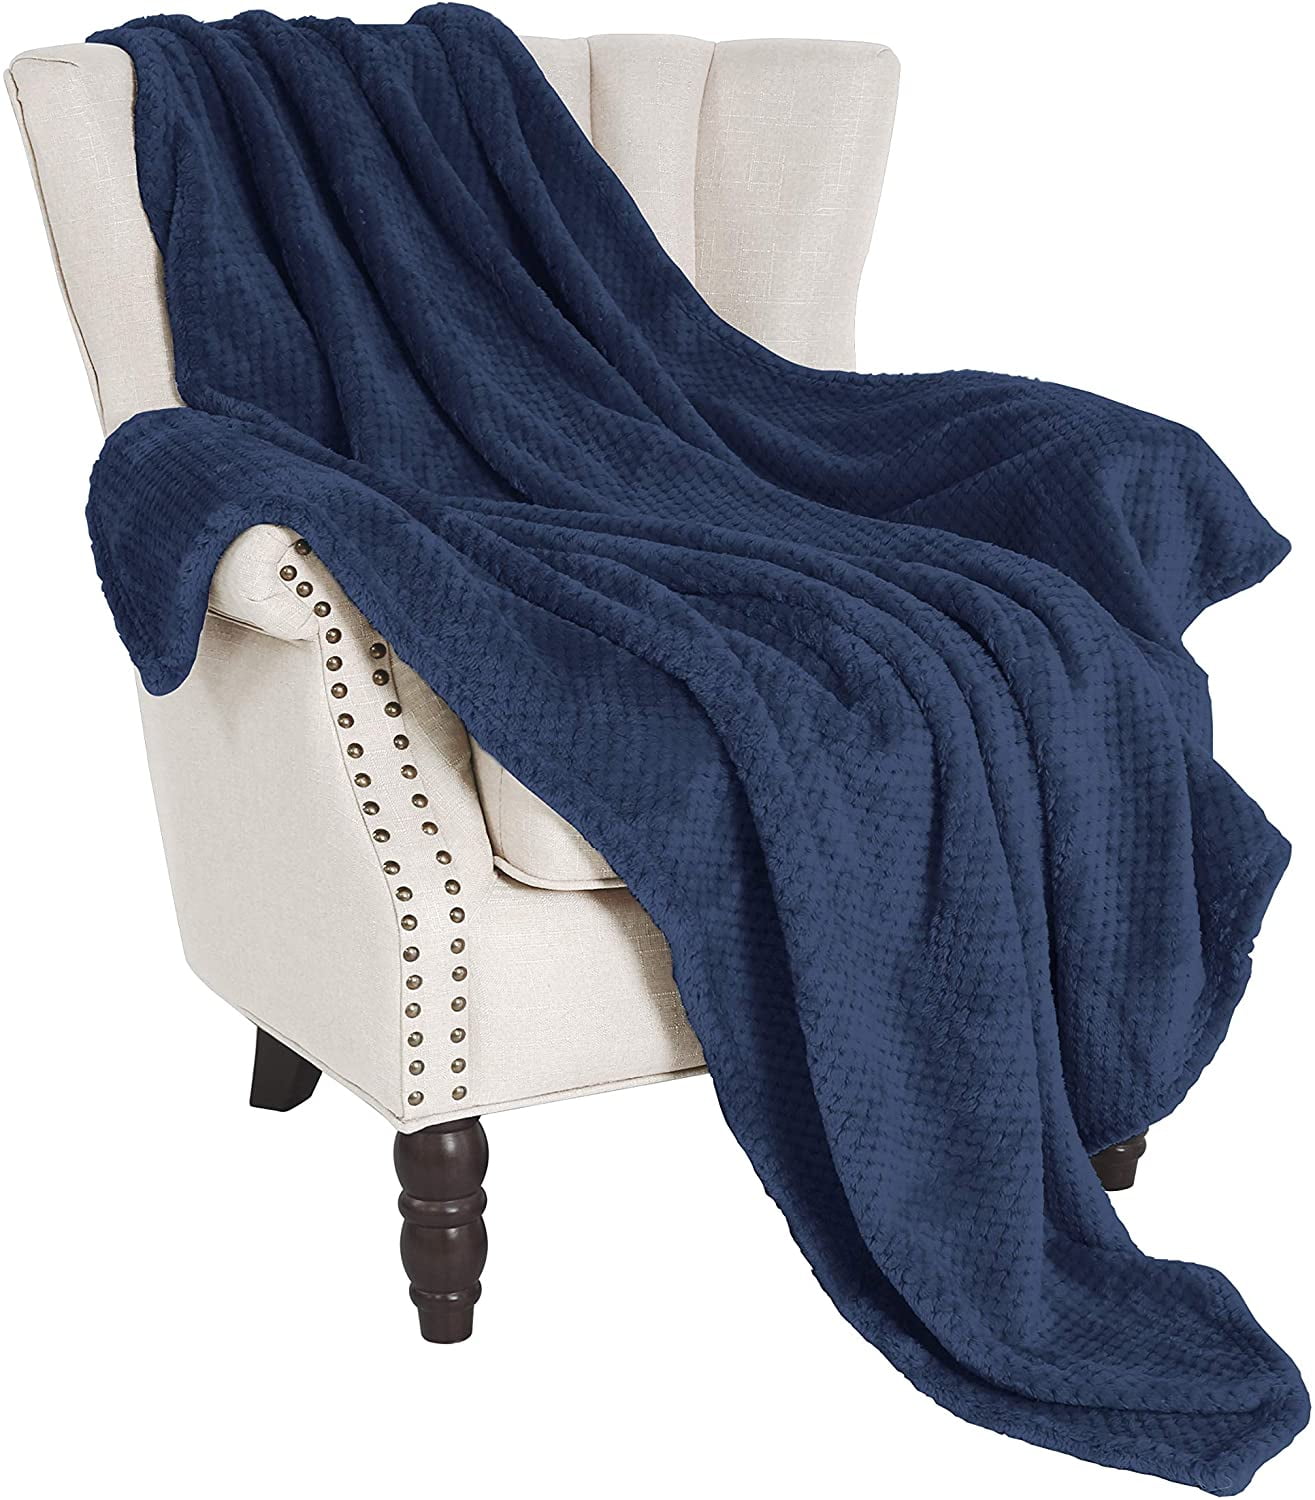 Exclusivo Mezcla Waffle Textured Soft Fleece Blanket, Large Throw Blanket(Navy Blue, 50 x 70 inches)- Cozy, Warm and Lightweight